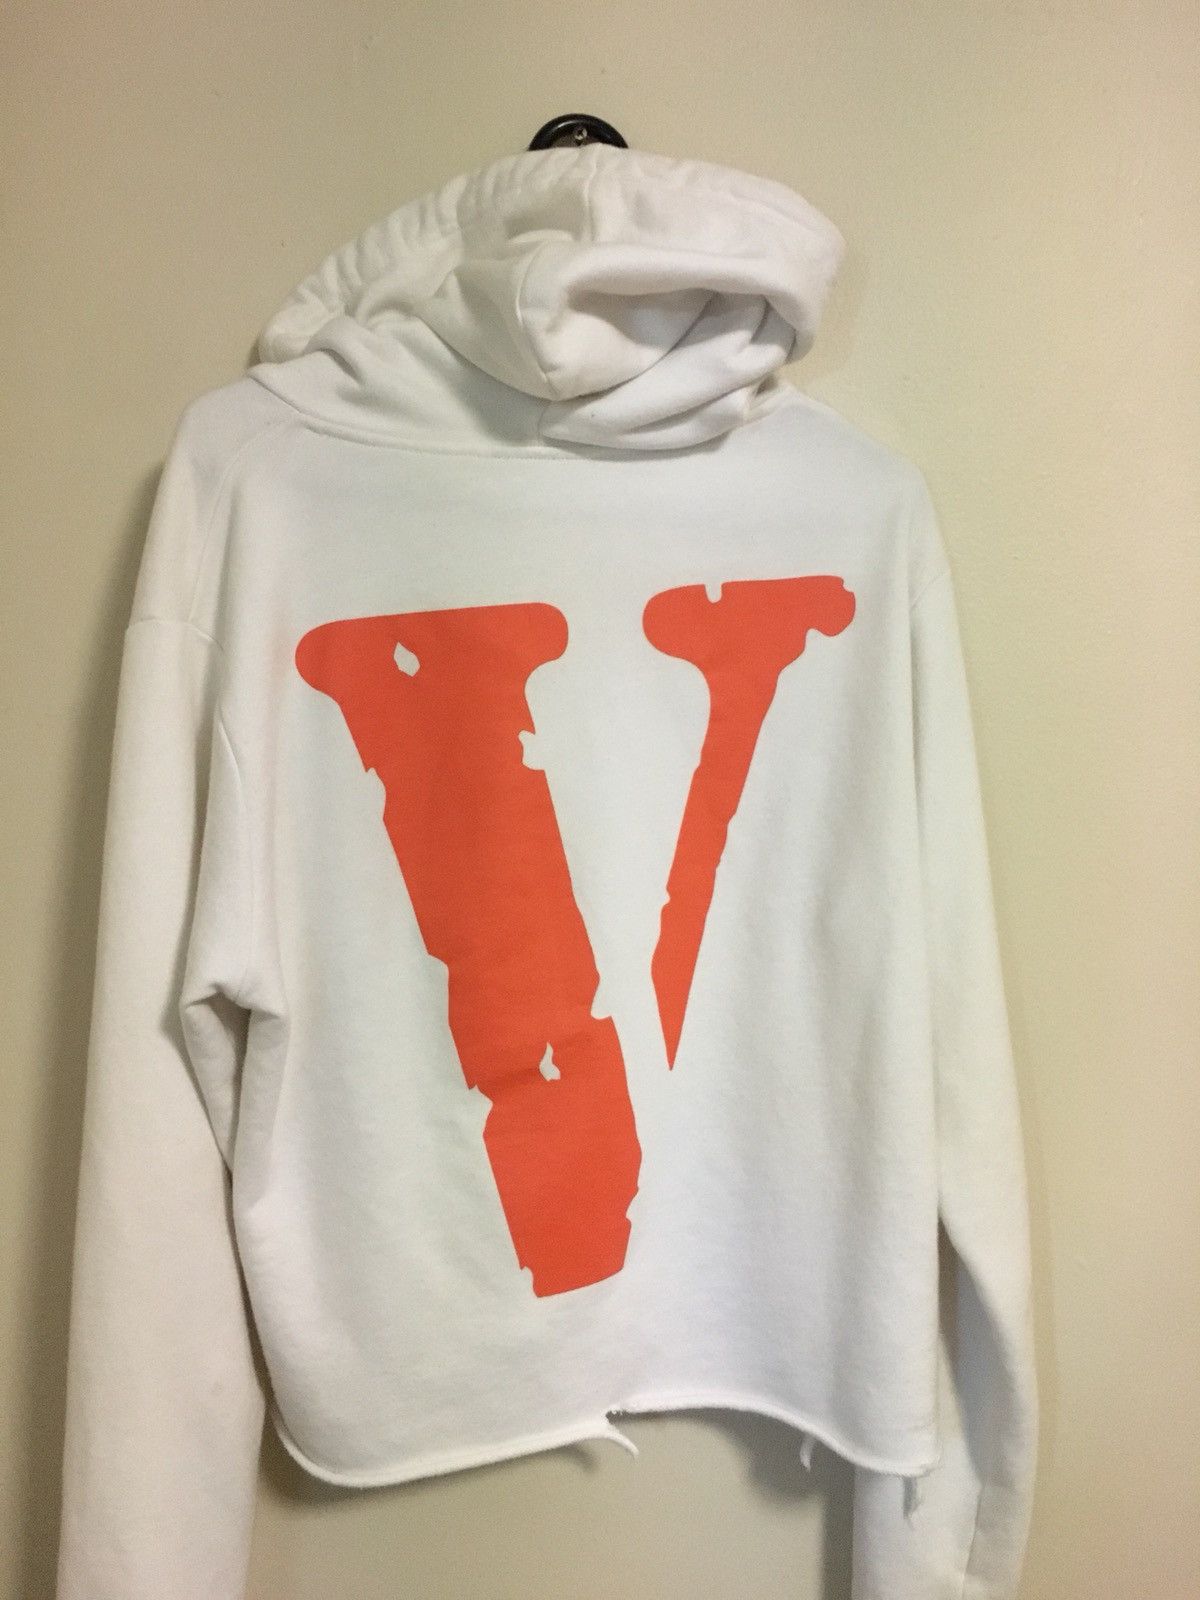 Vlone Vlone Friends Cropped Hoodie Size US M / EU 48-50 / 2 - 2 Preview